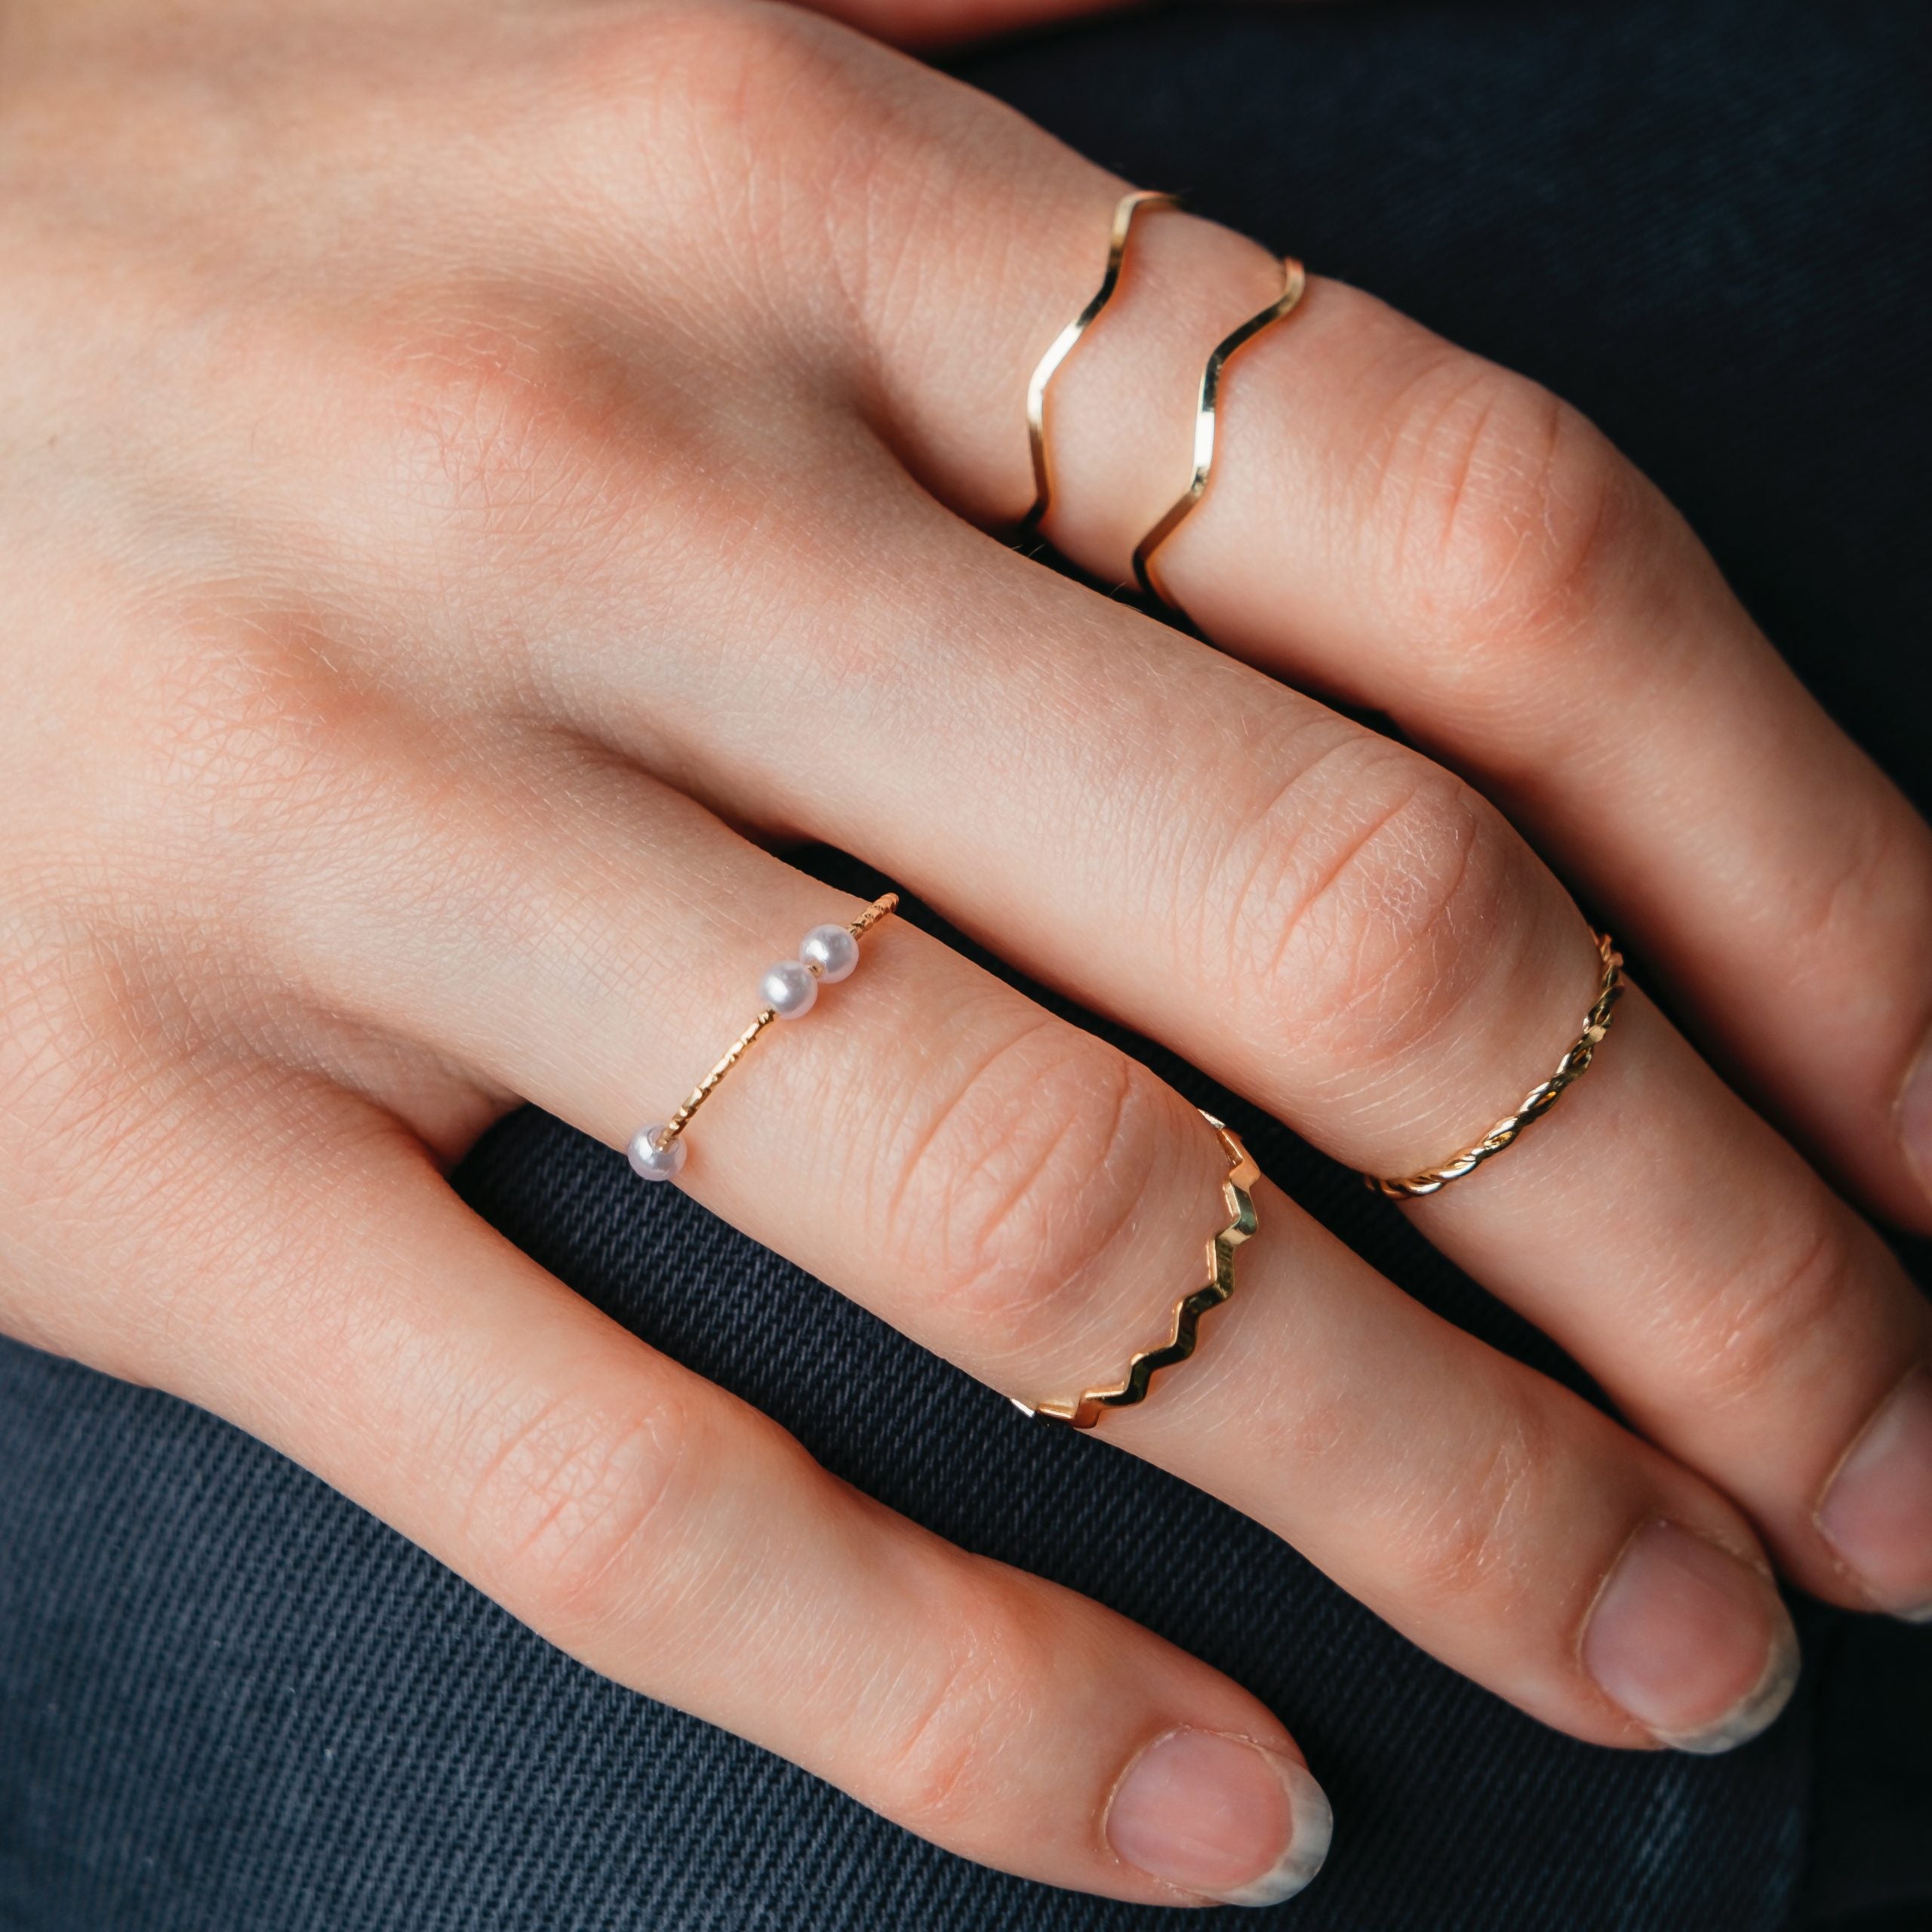 Gold Stacking Rings Set of 5 14k Gold Fill Stackable Ring - Etsy